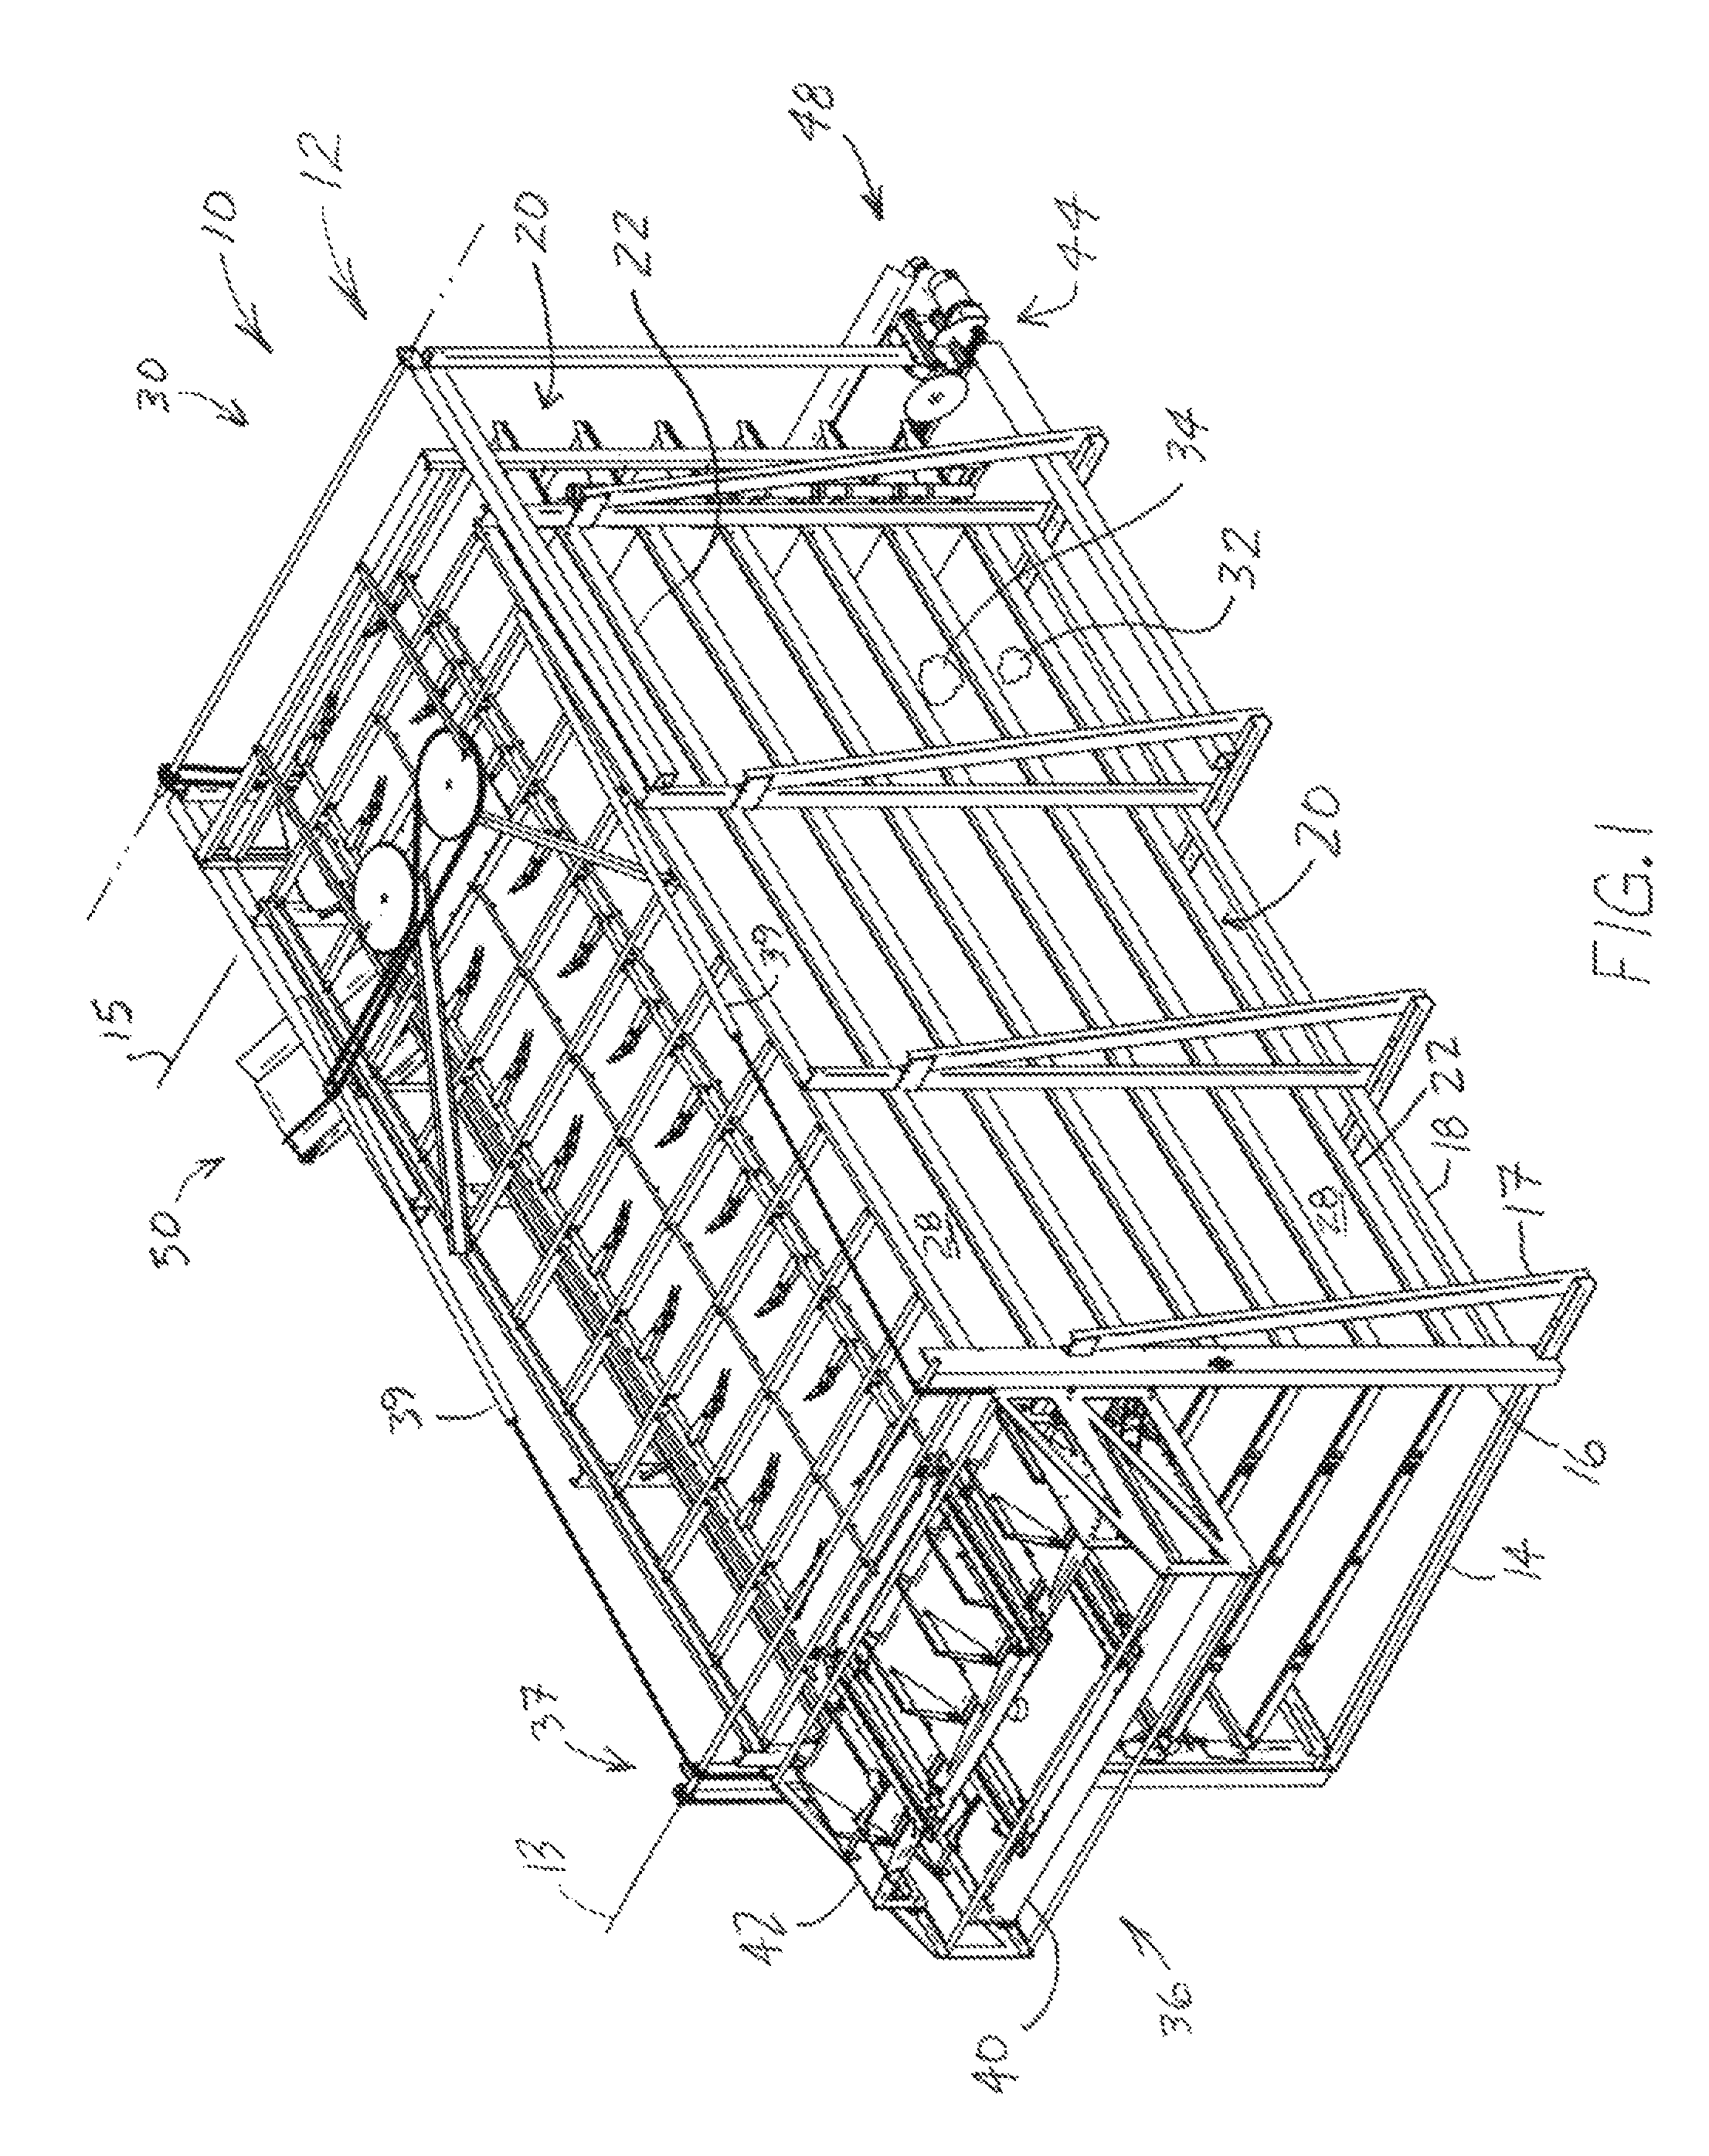 Sprouted seed grain growing and harvesting apparatus and method